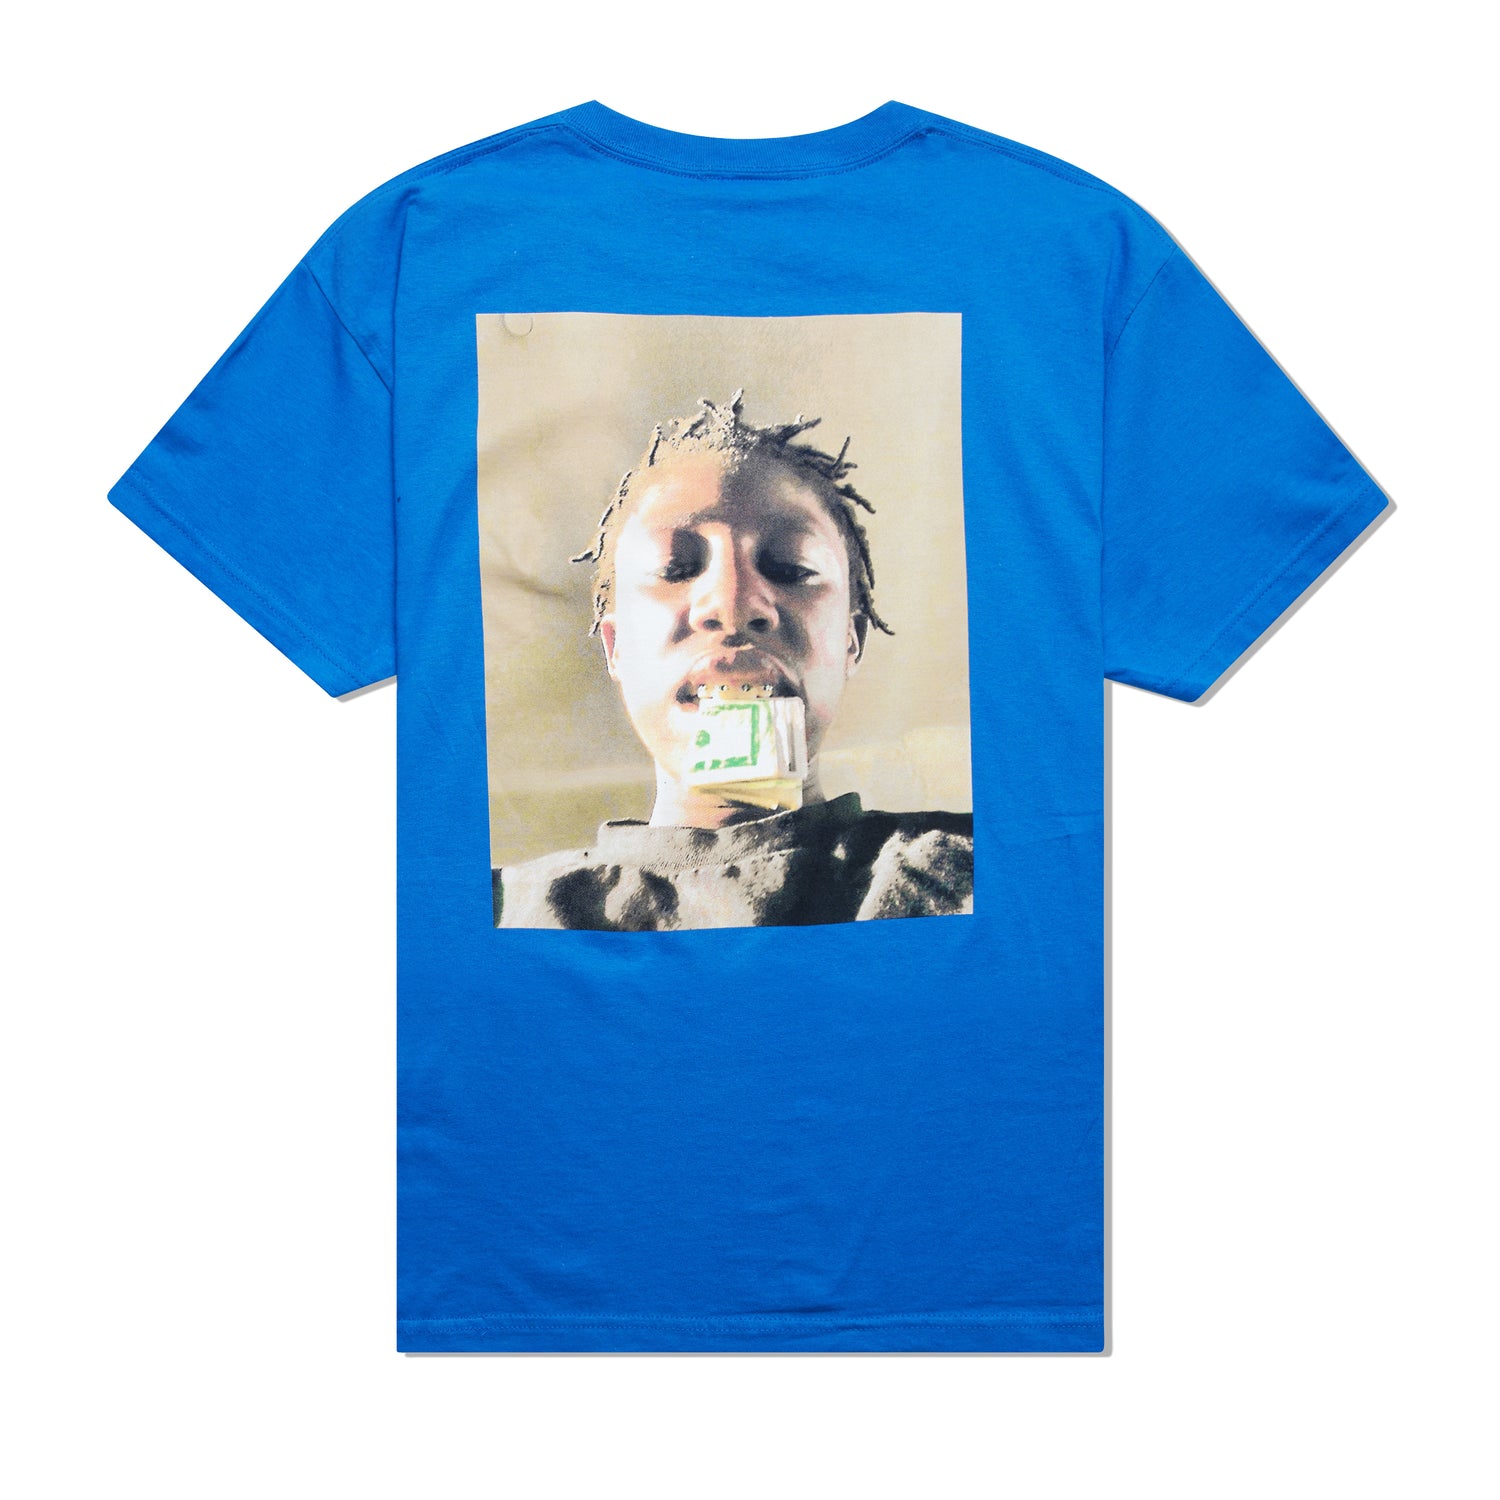 Kader 'Put Your Money Where Your Mouth Is' Tee, Blue